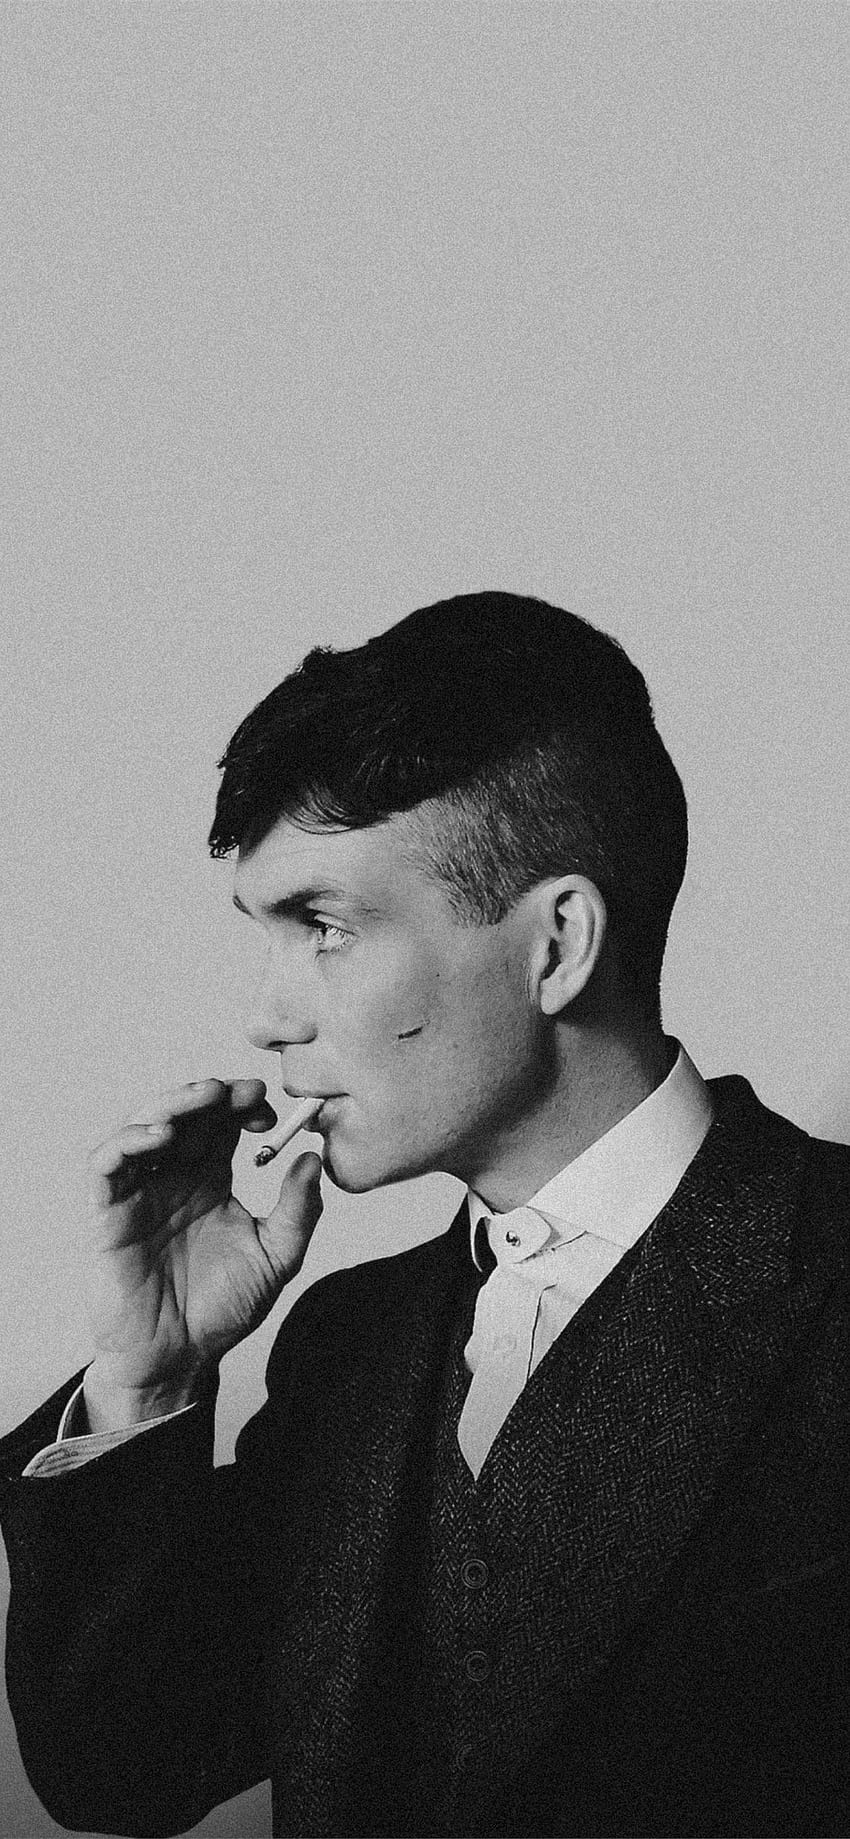 Best Peaky blinders iPhone, Tommy Shelby Quotes HD phone wallpaper